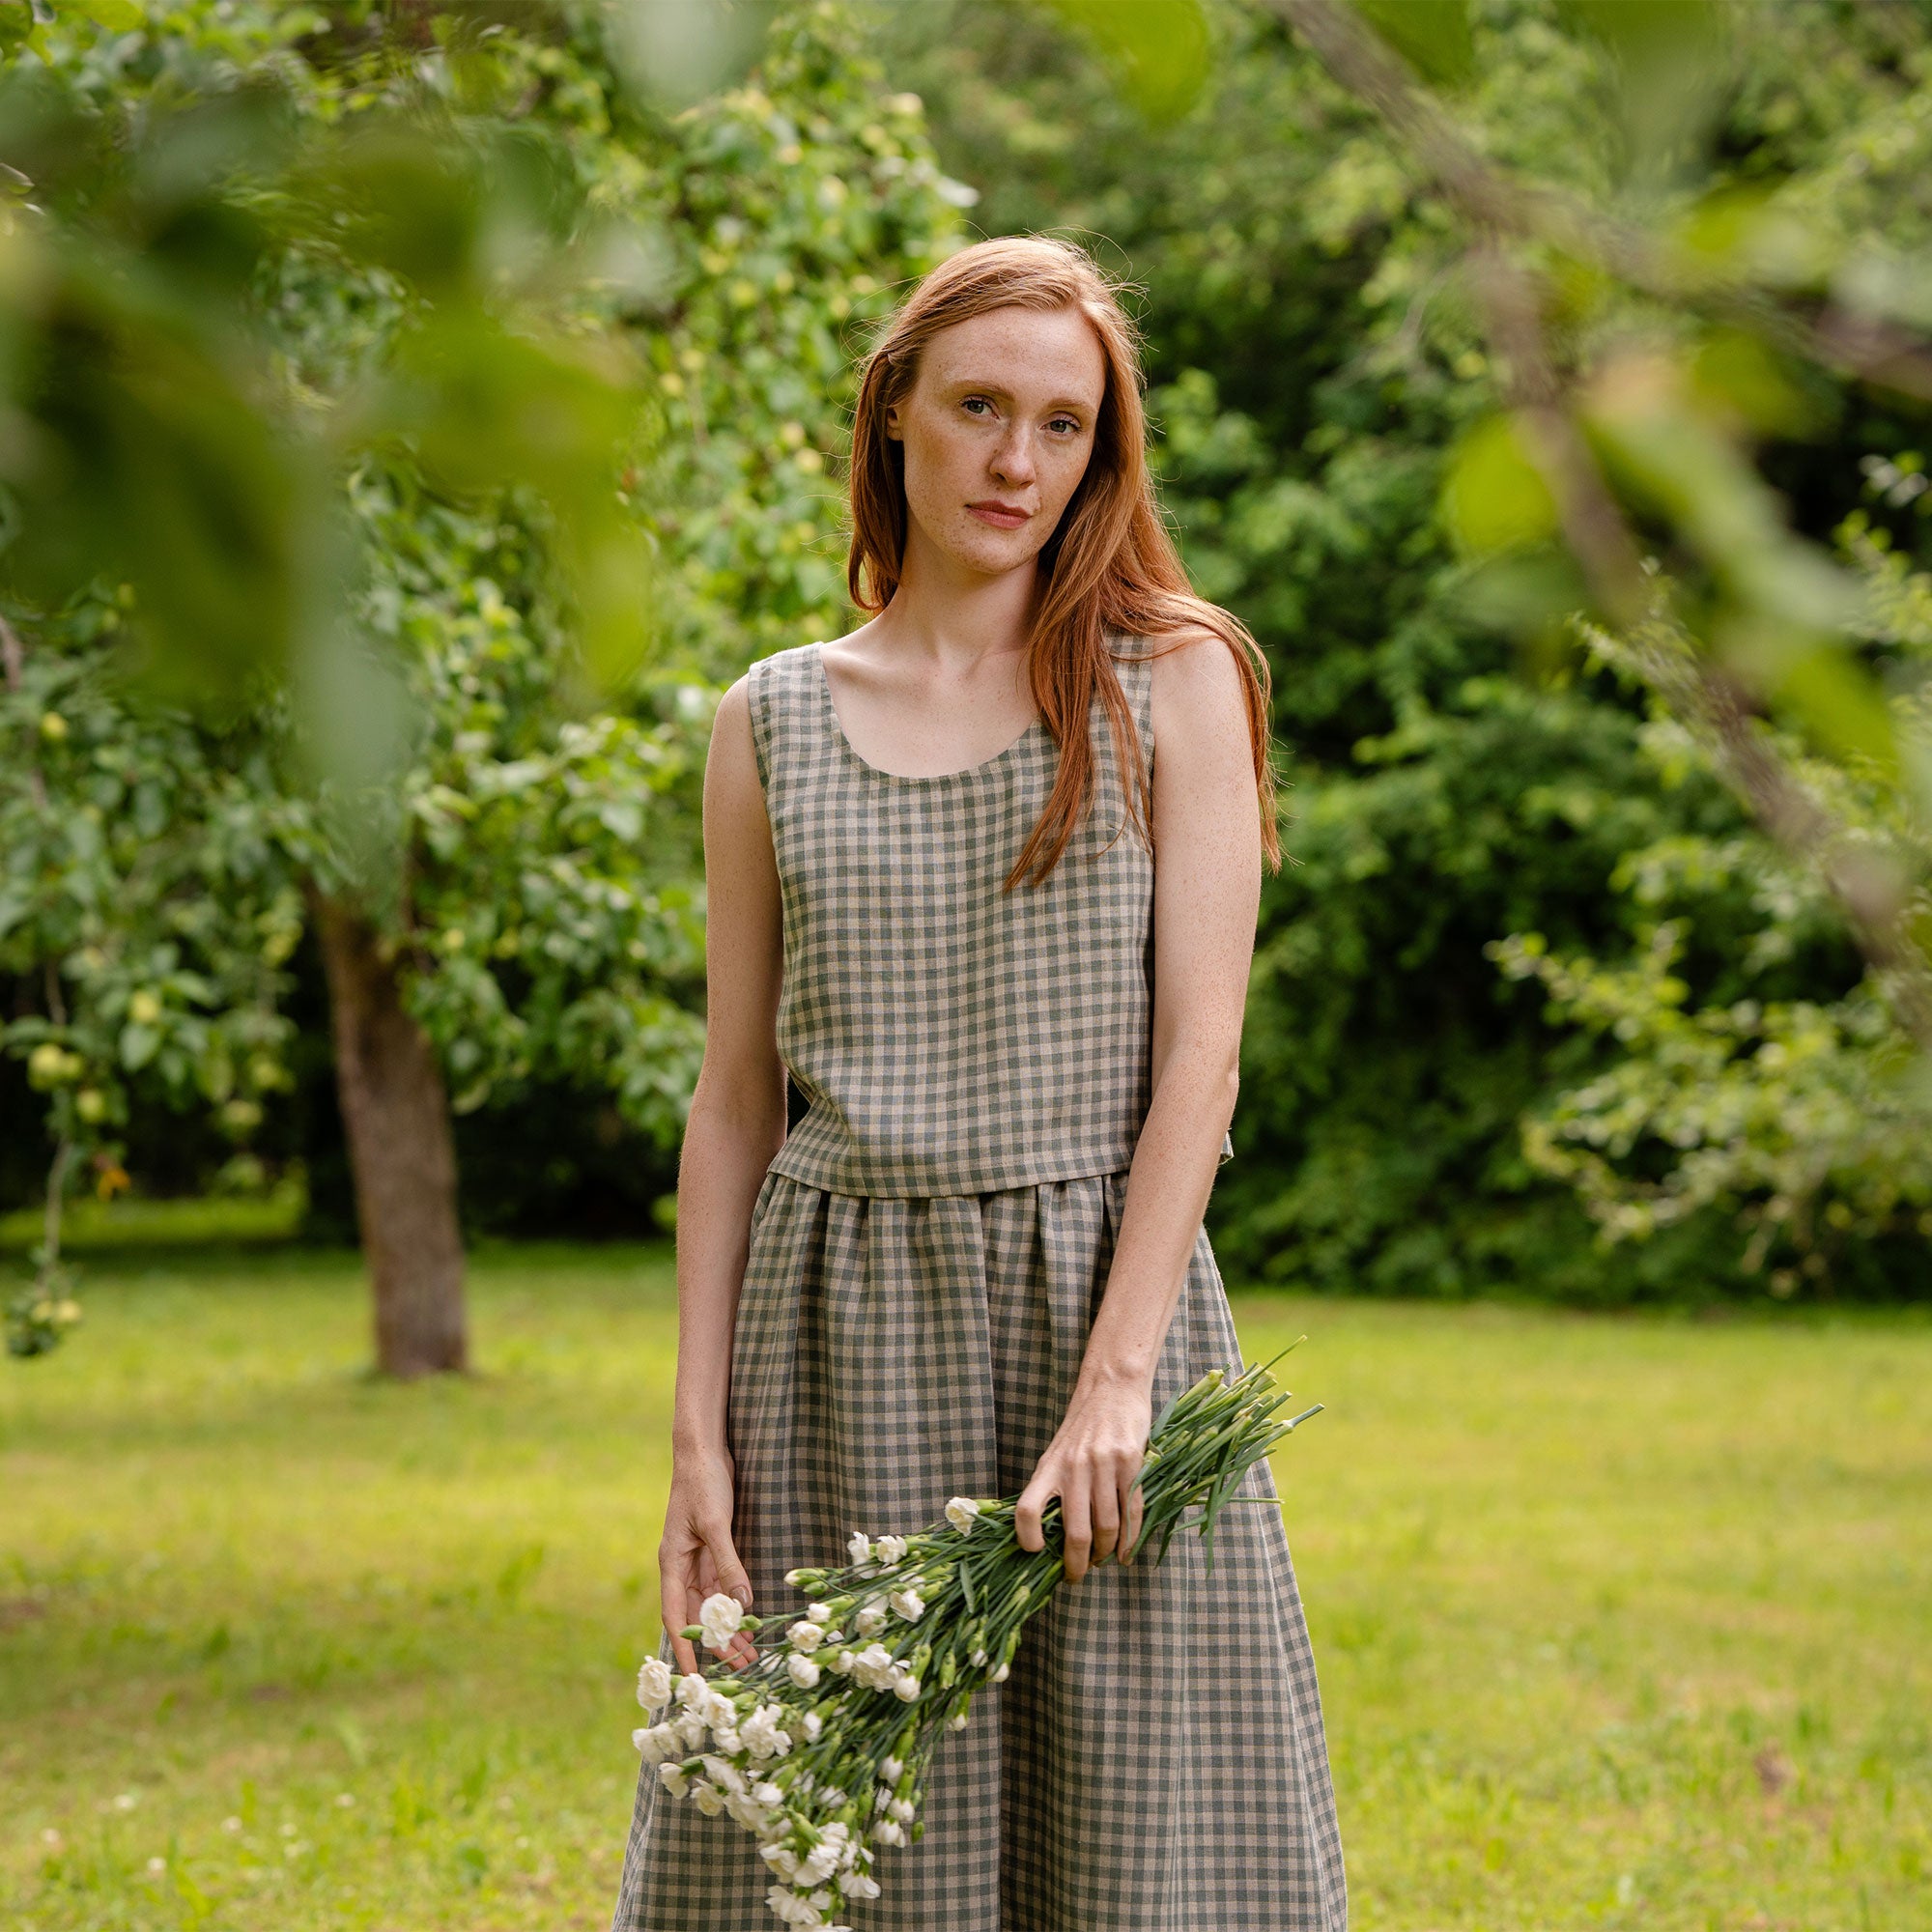 The model in the photograph is visible from the front, with a close-up view of the ANA cropped linen blouse in a green gingham pattern. The top is sleeveless, matched with same garment bottoms. There are blurred nature elements visible in the background.